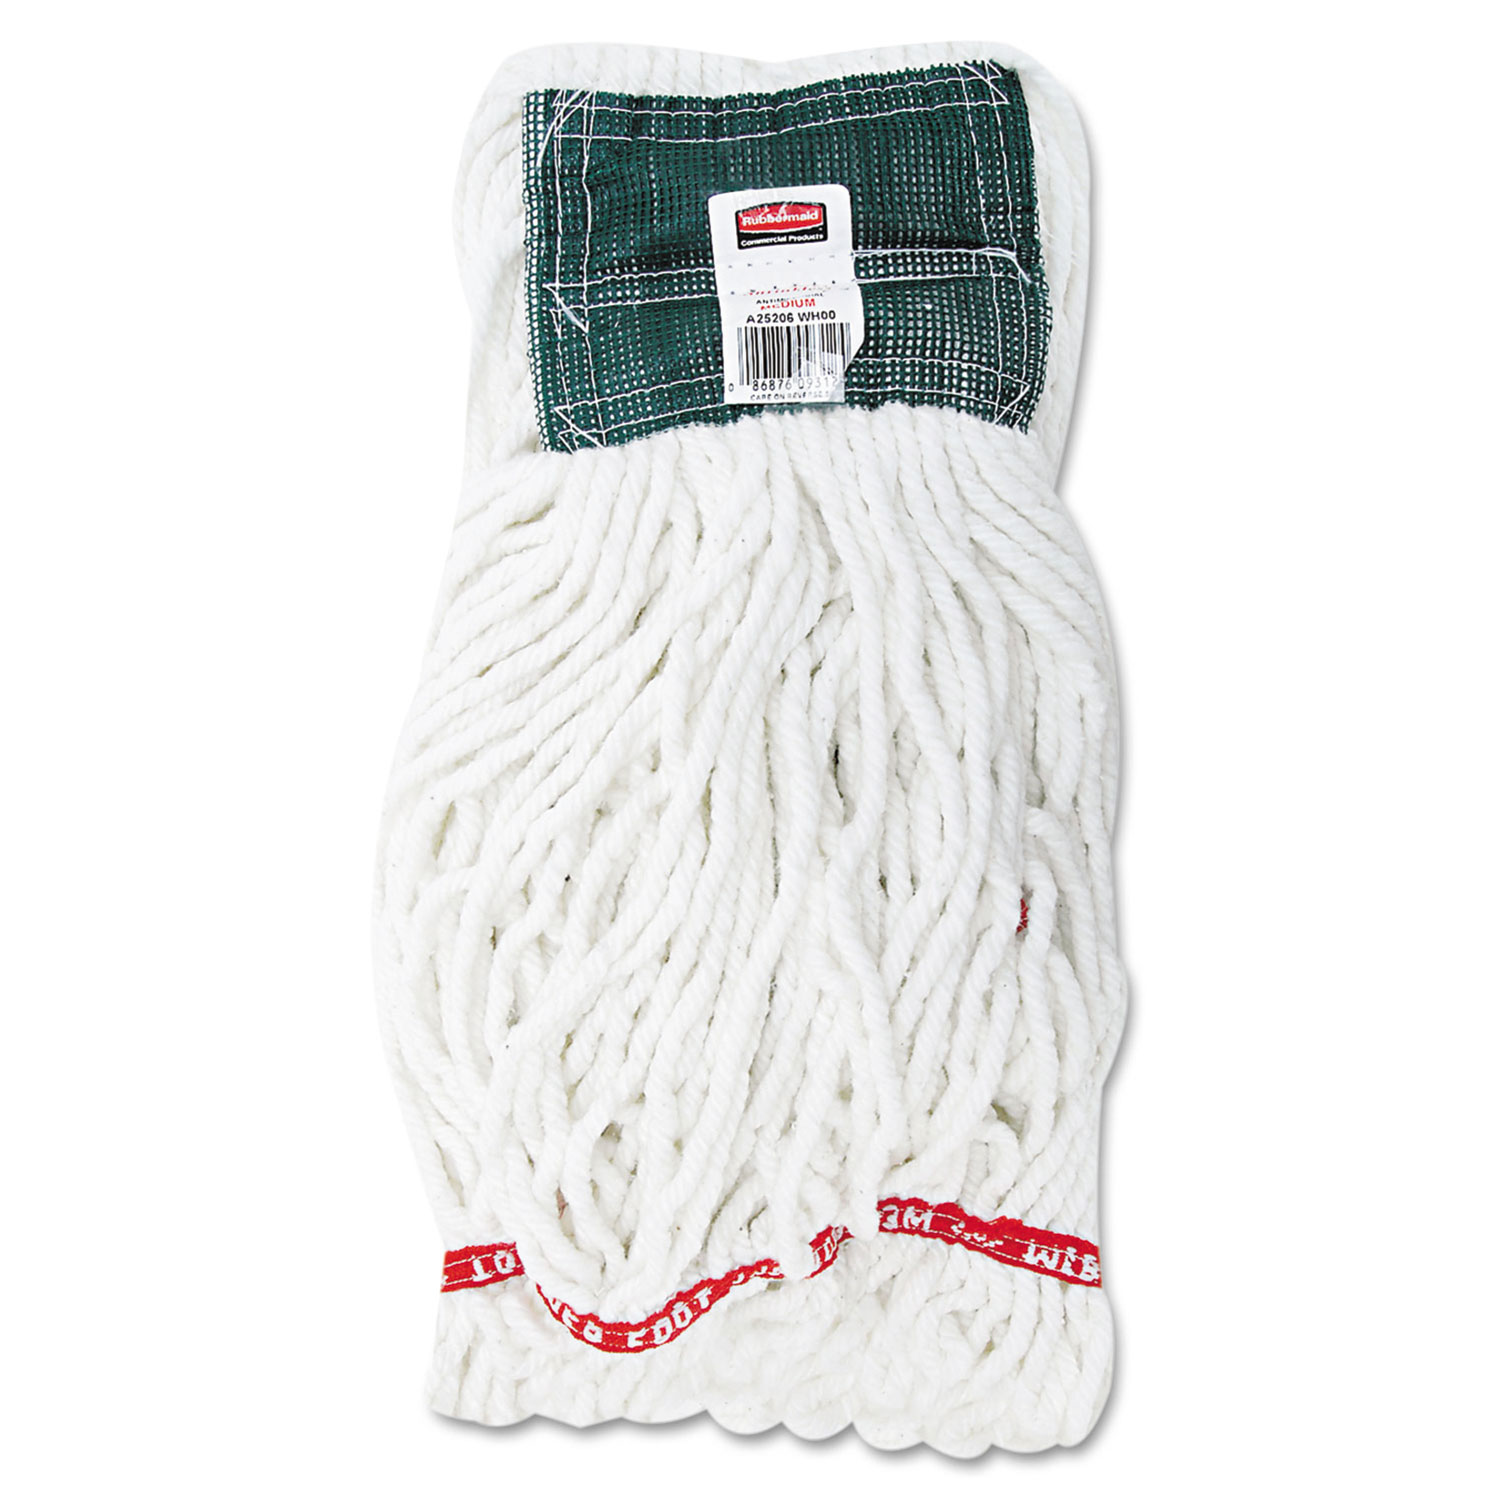  Rubbermaid Commercial FGA25206WH00 Web Foot Shrinkless Looped-End Wet Mop Head, Cotton/Synthetic, Medium, White (RCPA25206WHICT) 